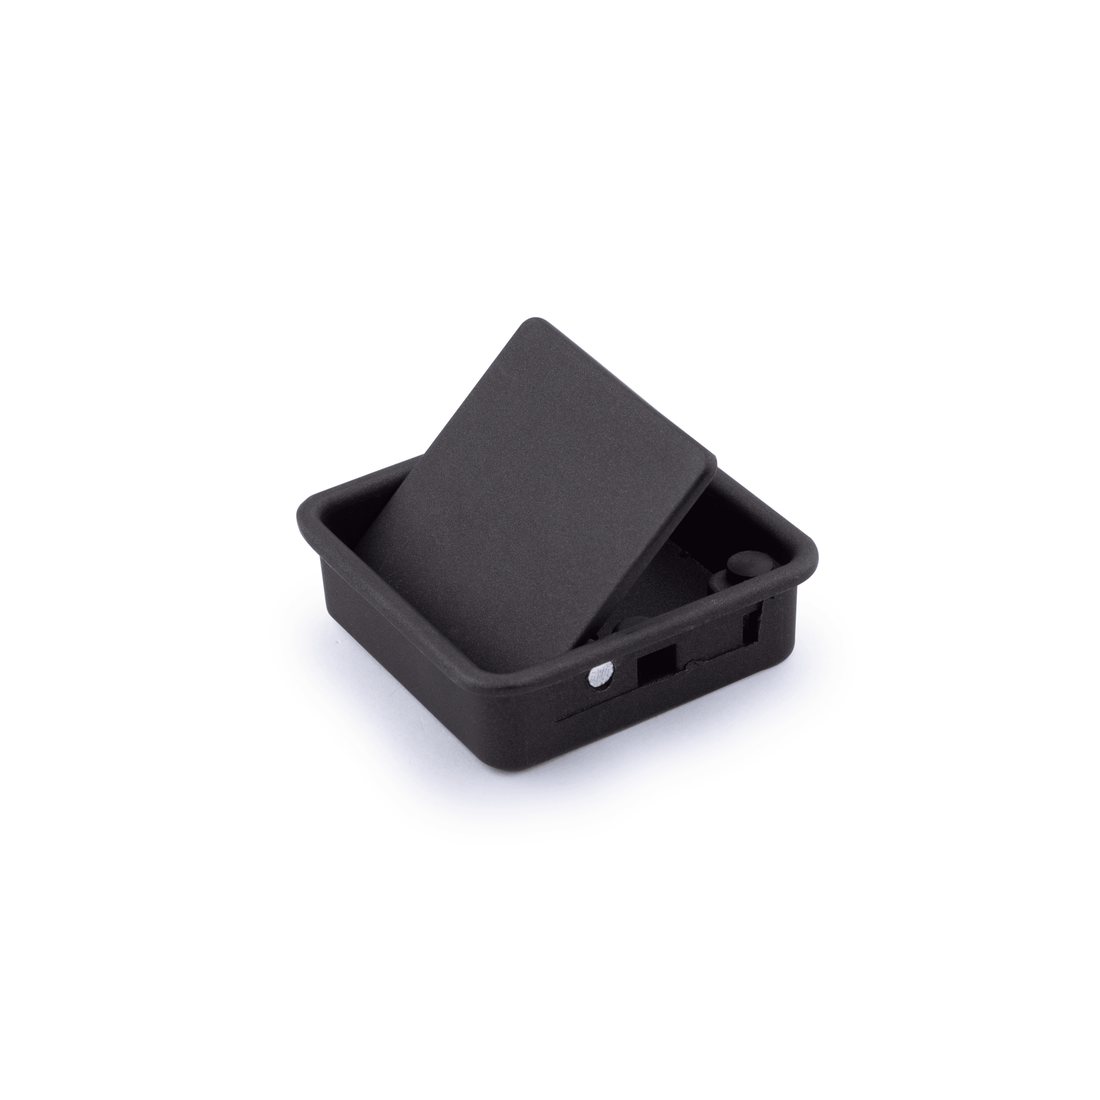 Concealed Square Handle Knob 45mm / Black - M A N T A R A